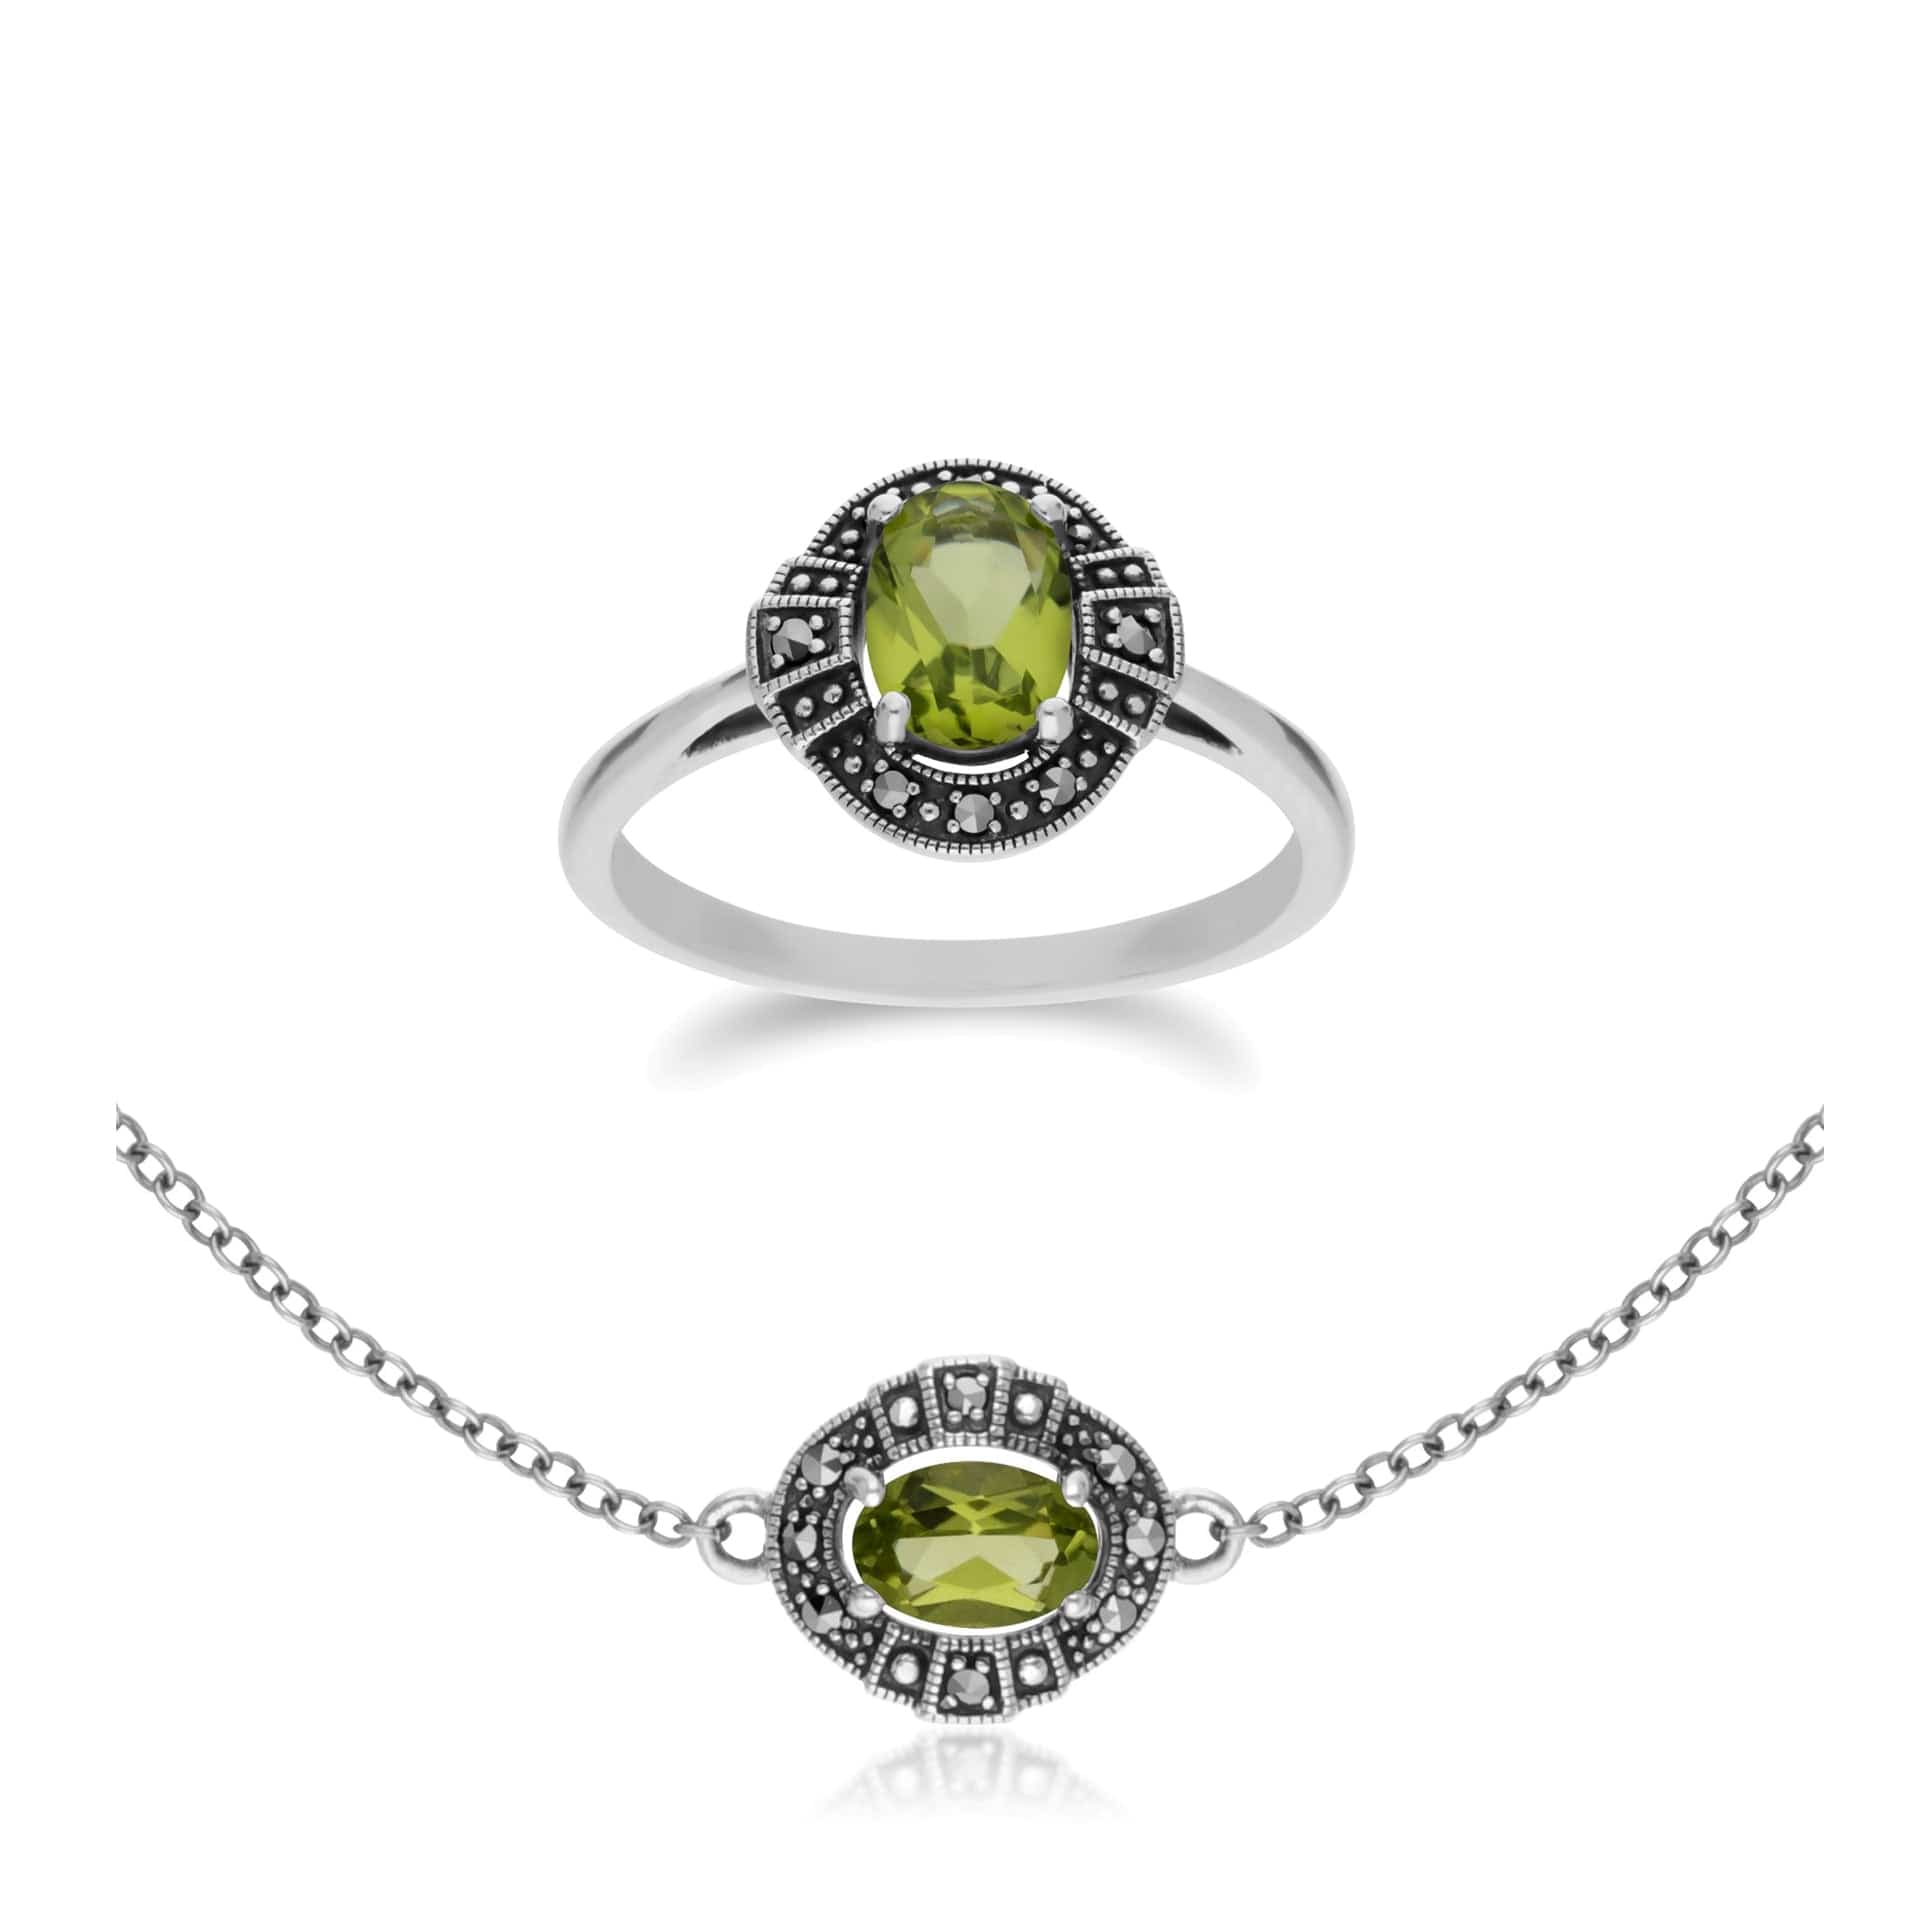 214L165404925-214R605704925 Art Deco Style Oval Peridot and Marcasite Cluster Ring & Bracelet Set in 925 Sterling Silver 1